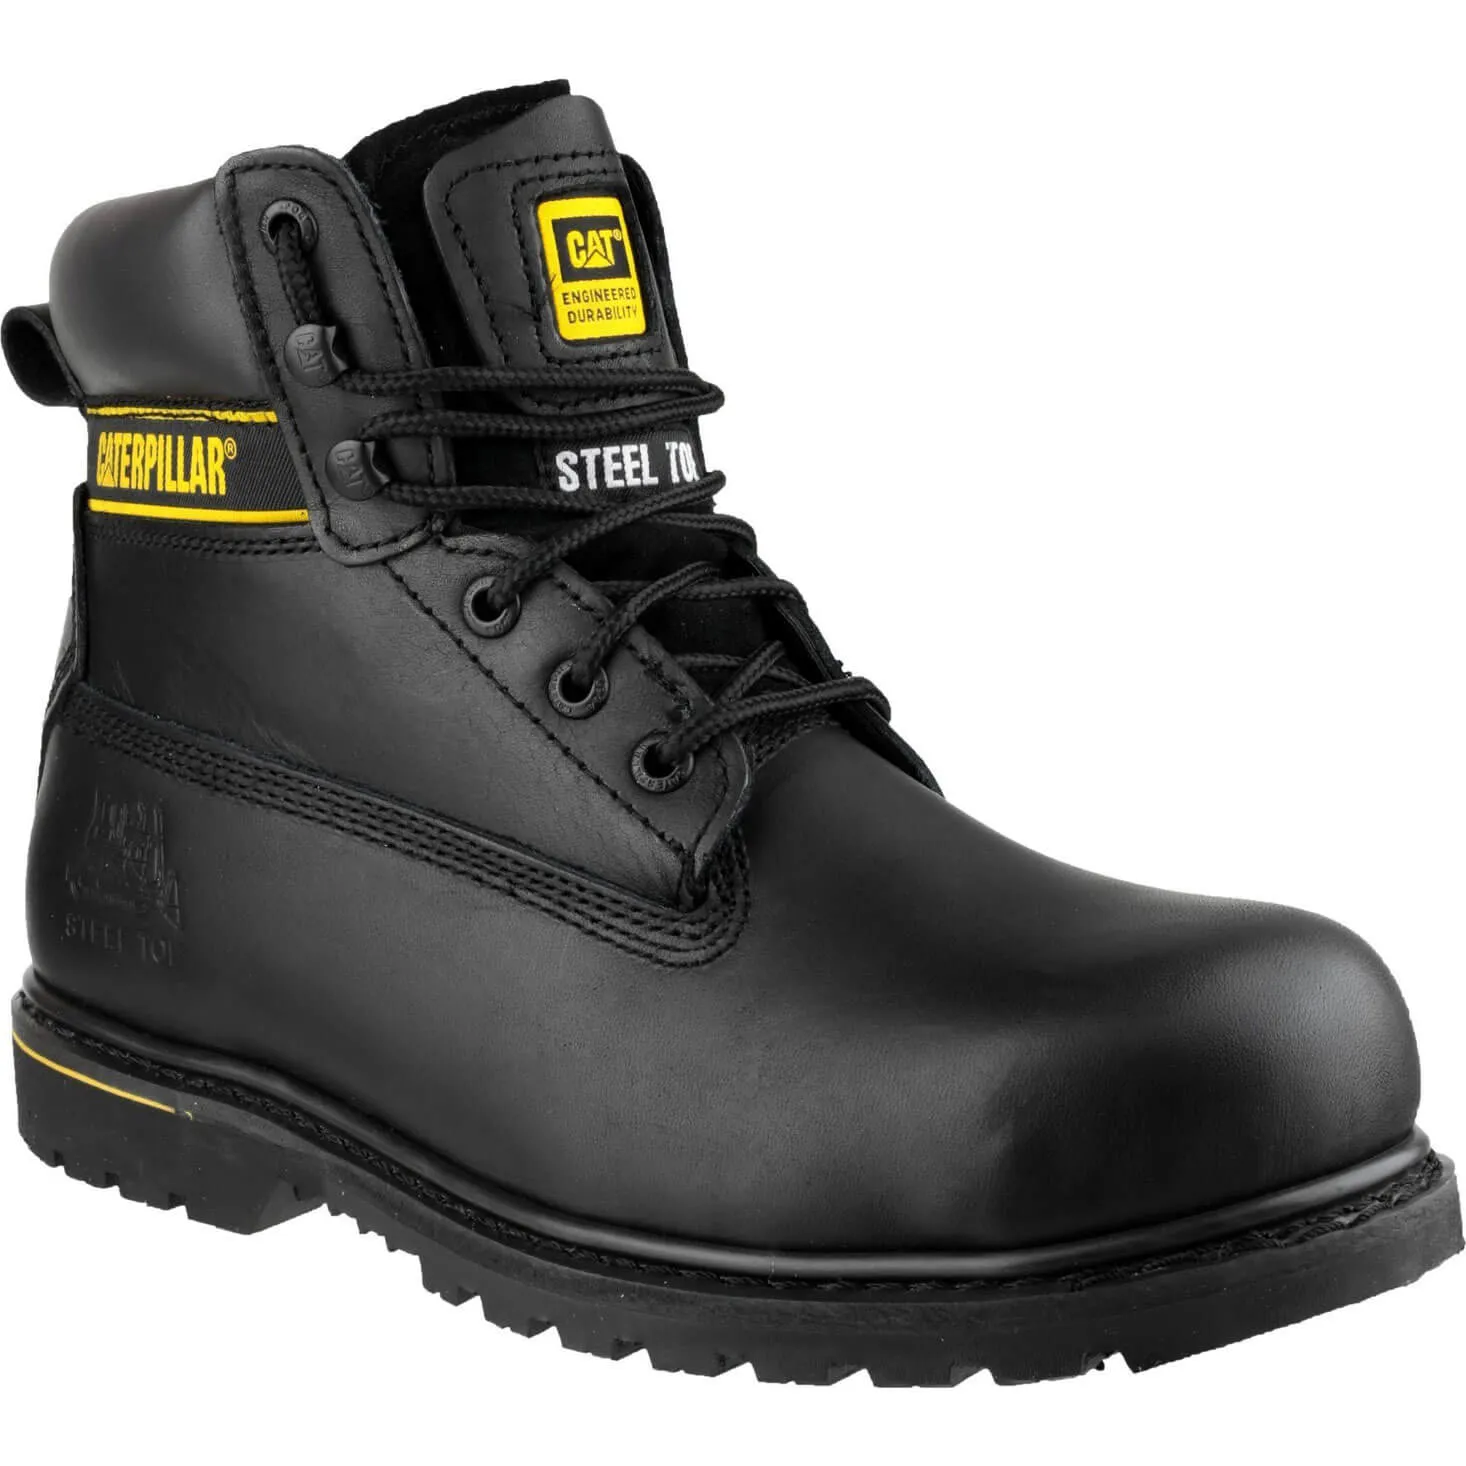 Caterpillar Mens Holton Safety Boots - Black, Size 7